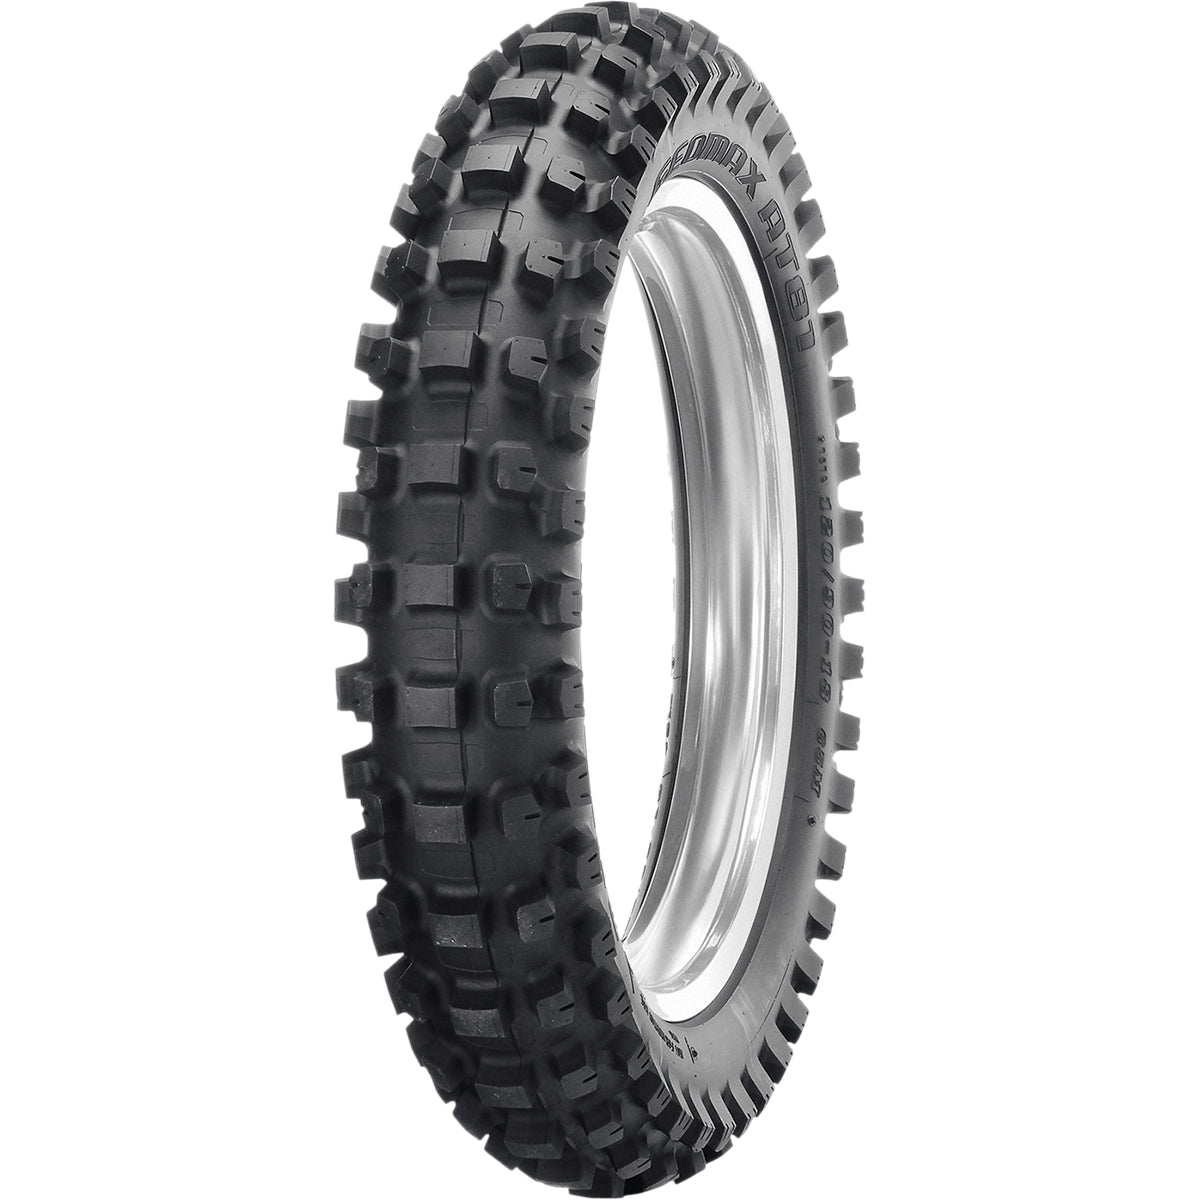 Dunlop Geomax AT81 18" Rear Off-Road Tires-0313